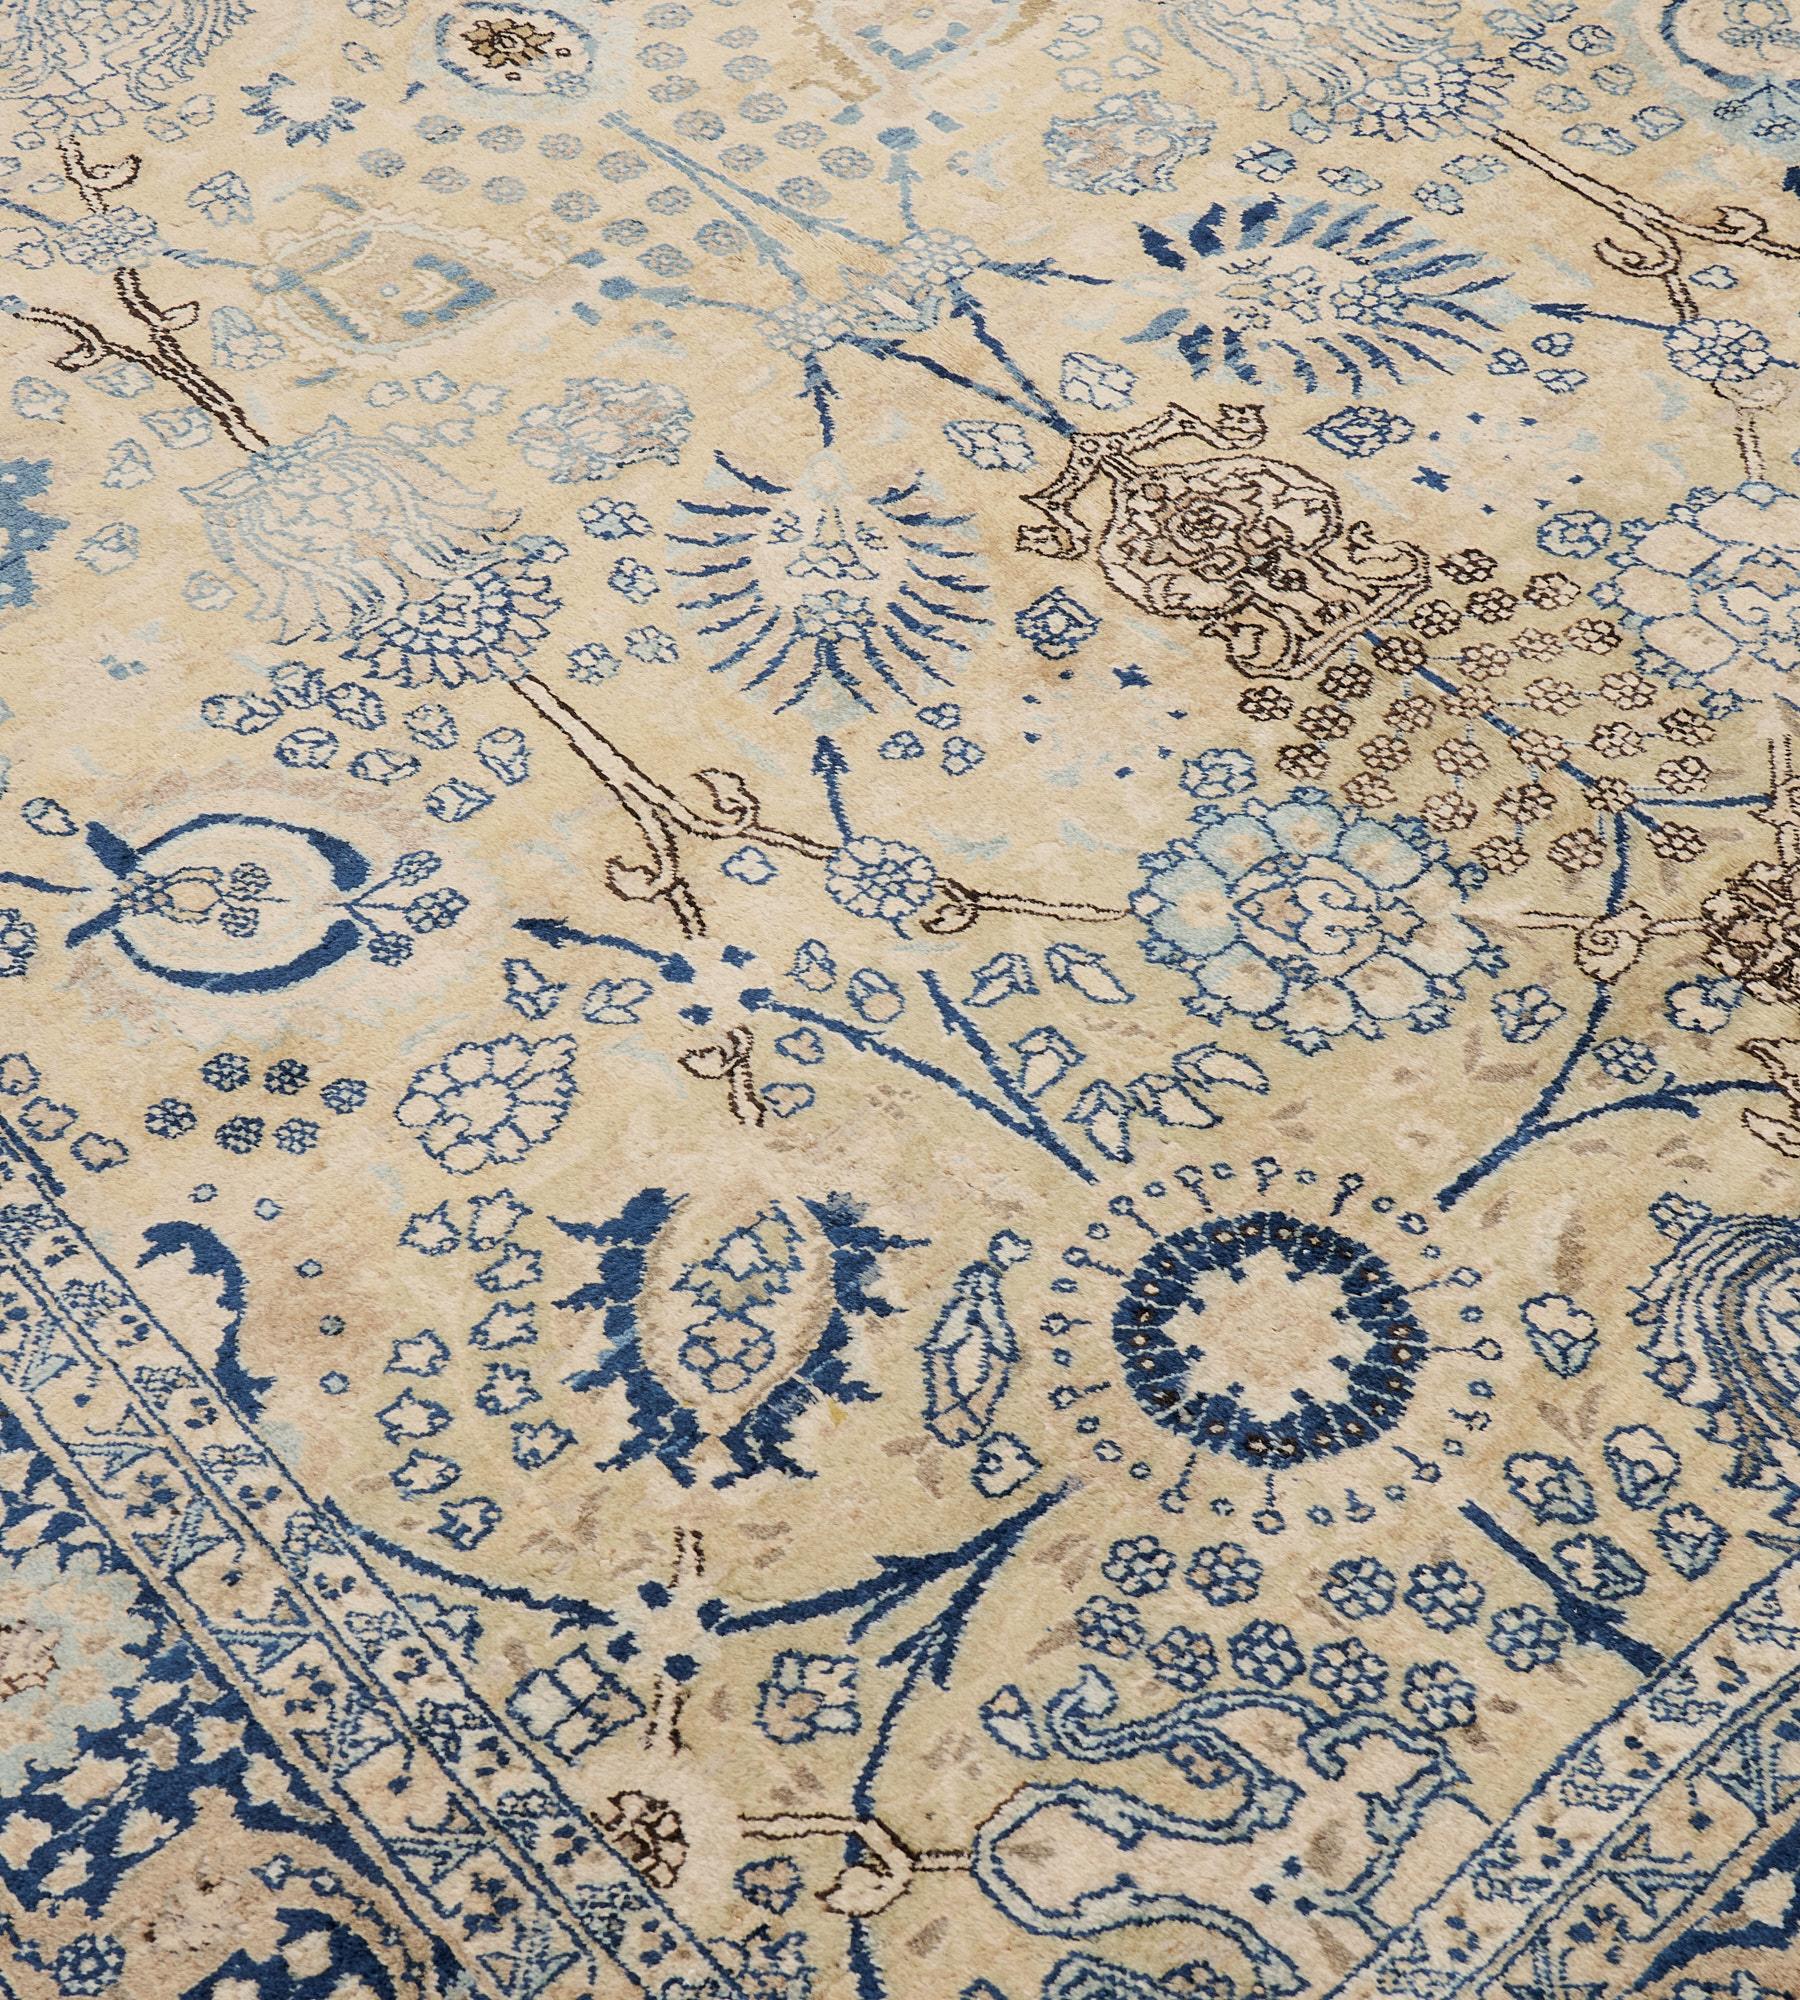 This traditional hand-woven Persian Tabriz rug soft buff-brown field with a central column of charcoal-black, indigo-blue, light blue and ivory flowering vases linked by scrolling palmette and floral vines, in an indigo-blue border of buff-brown and